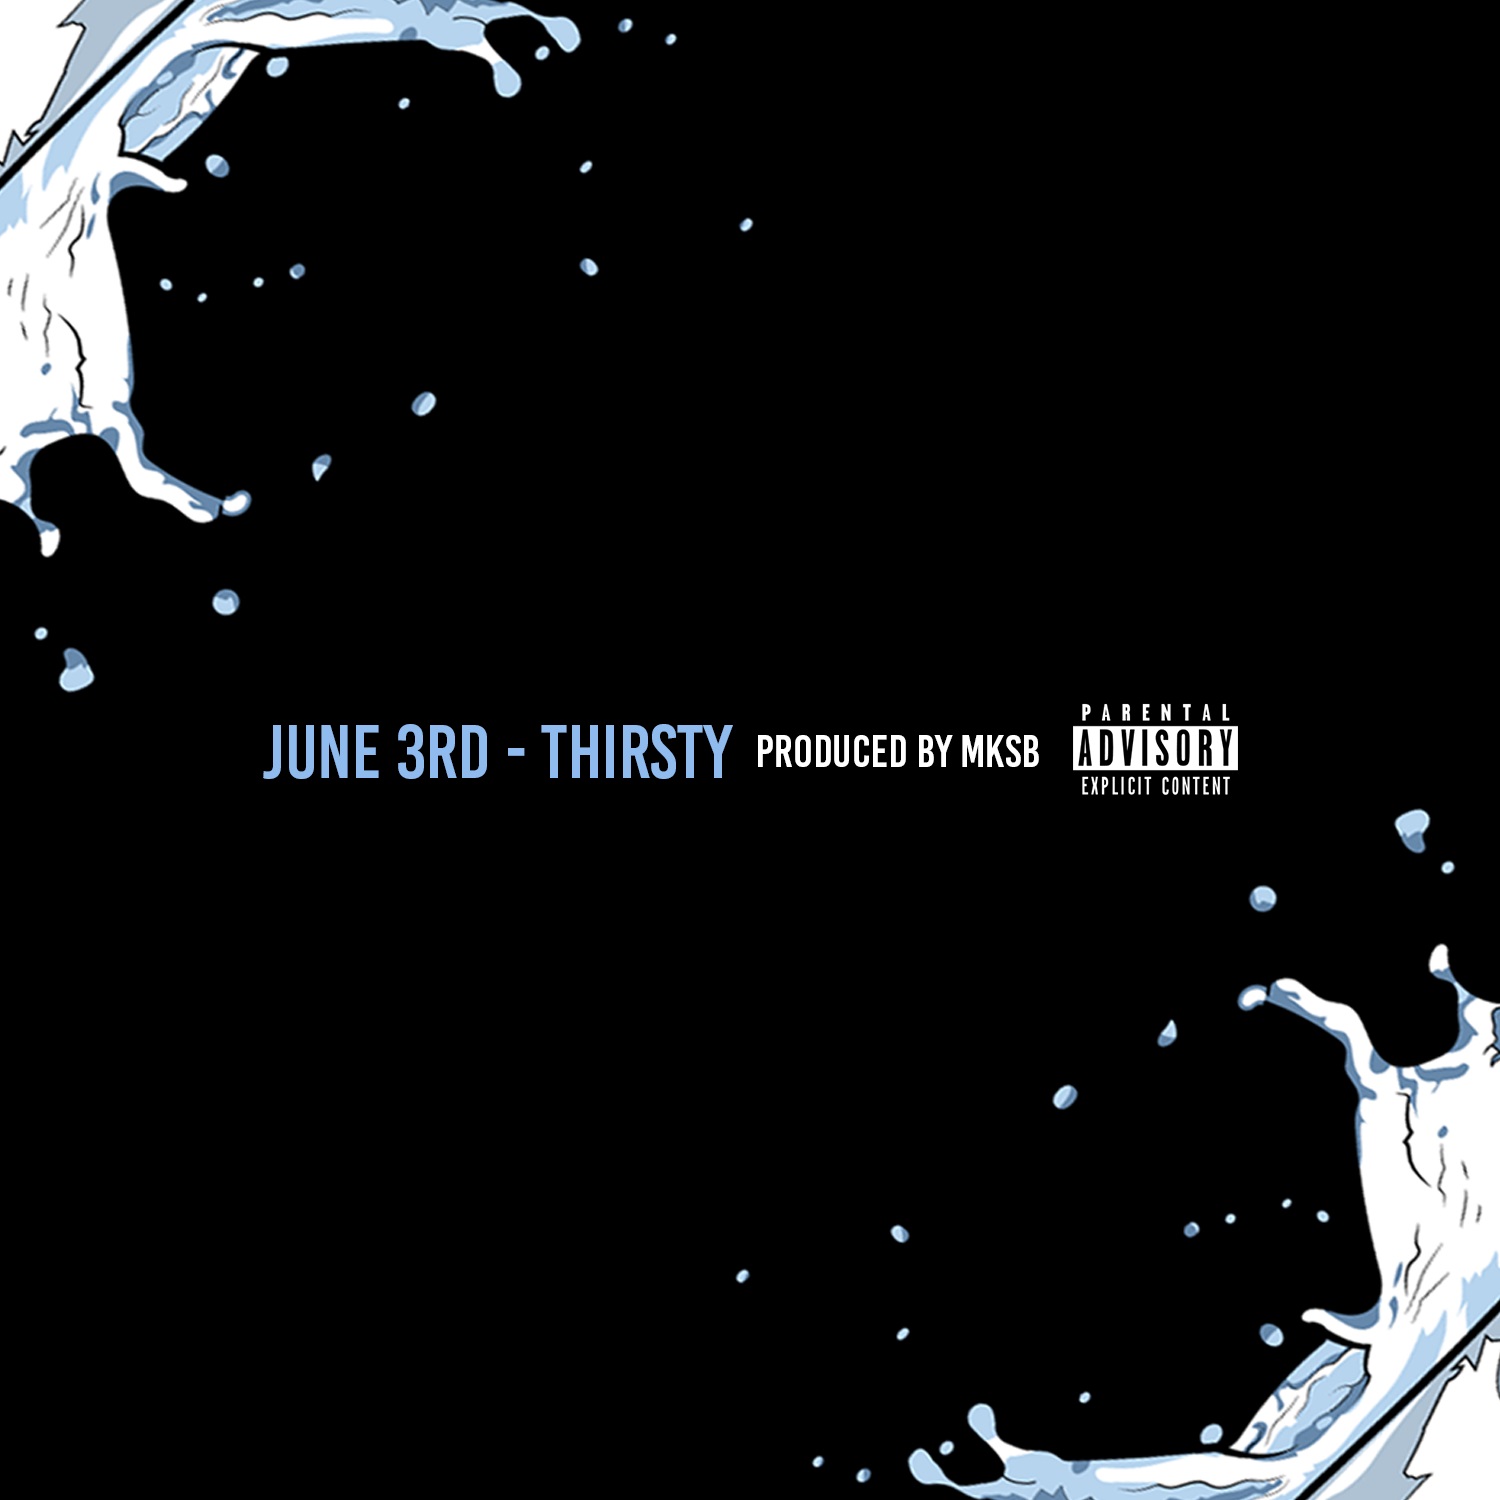 Track: June 3rd - Thirsty Produced by MKSB